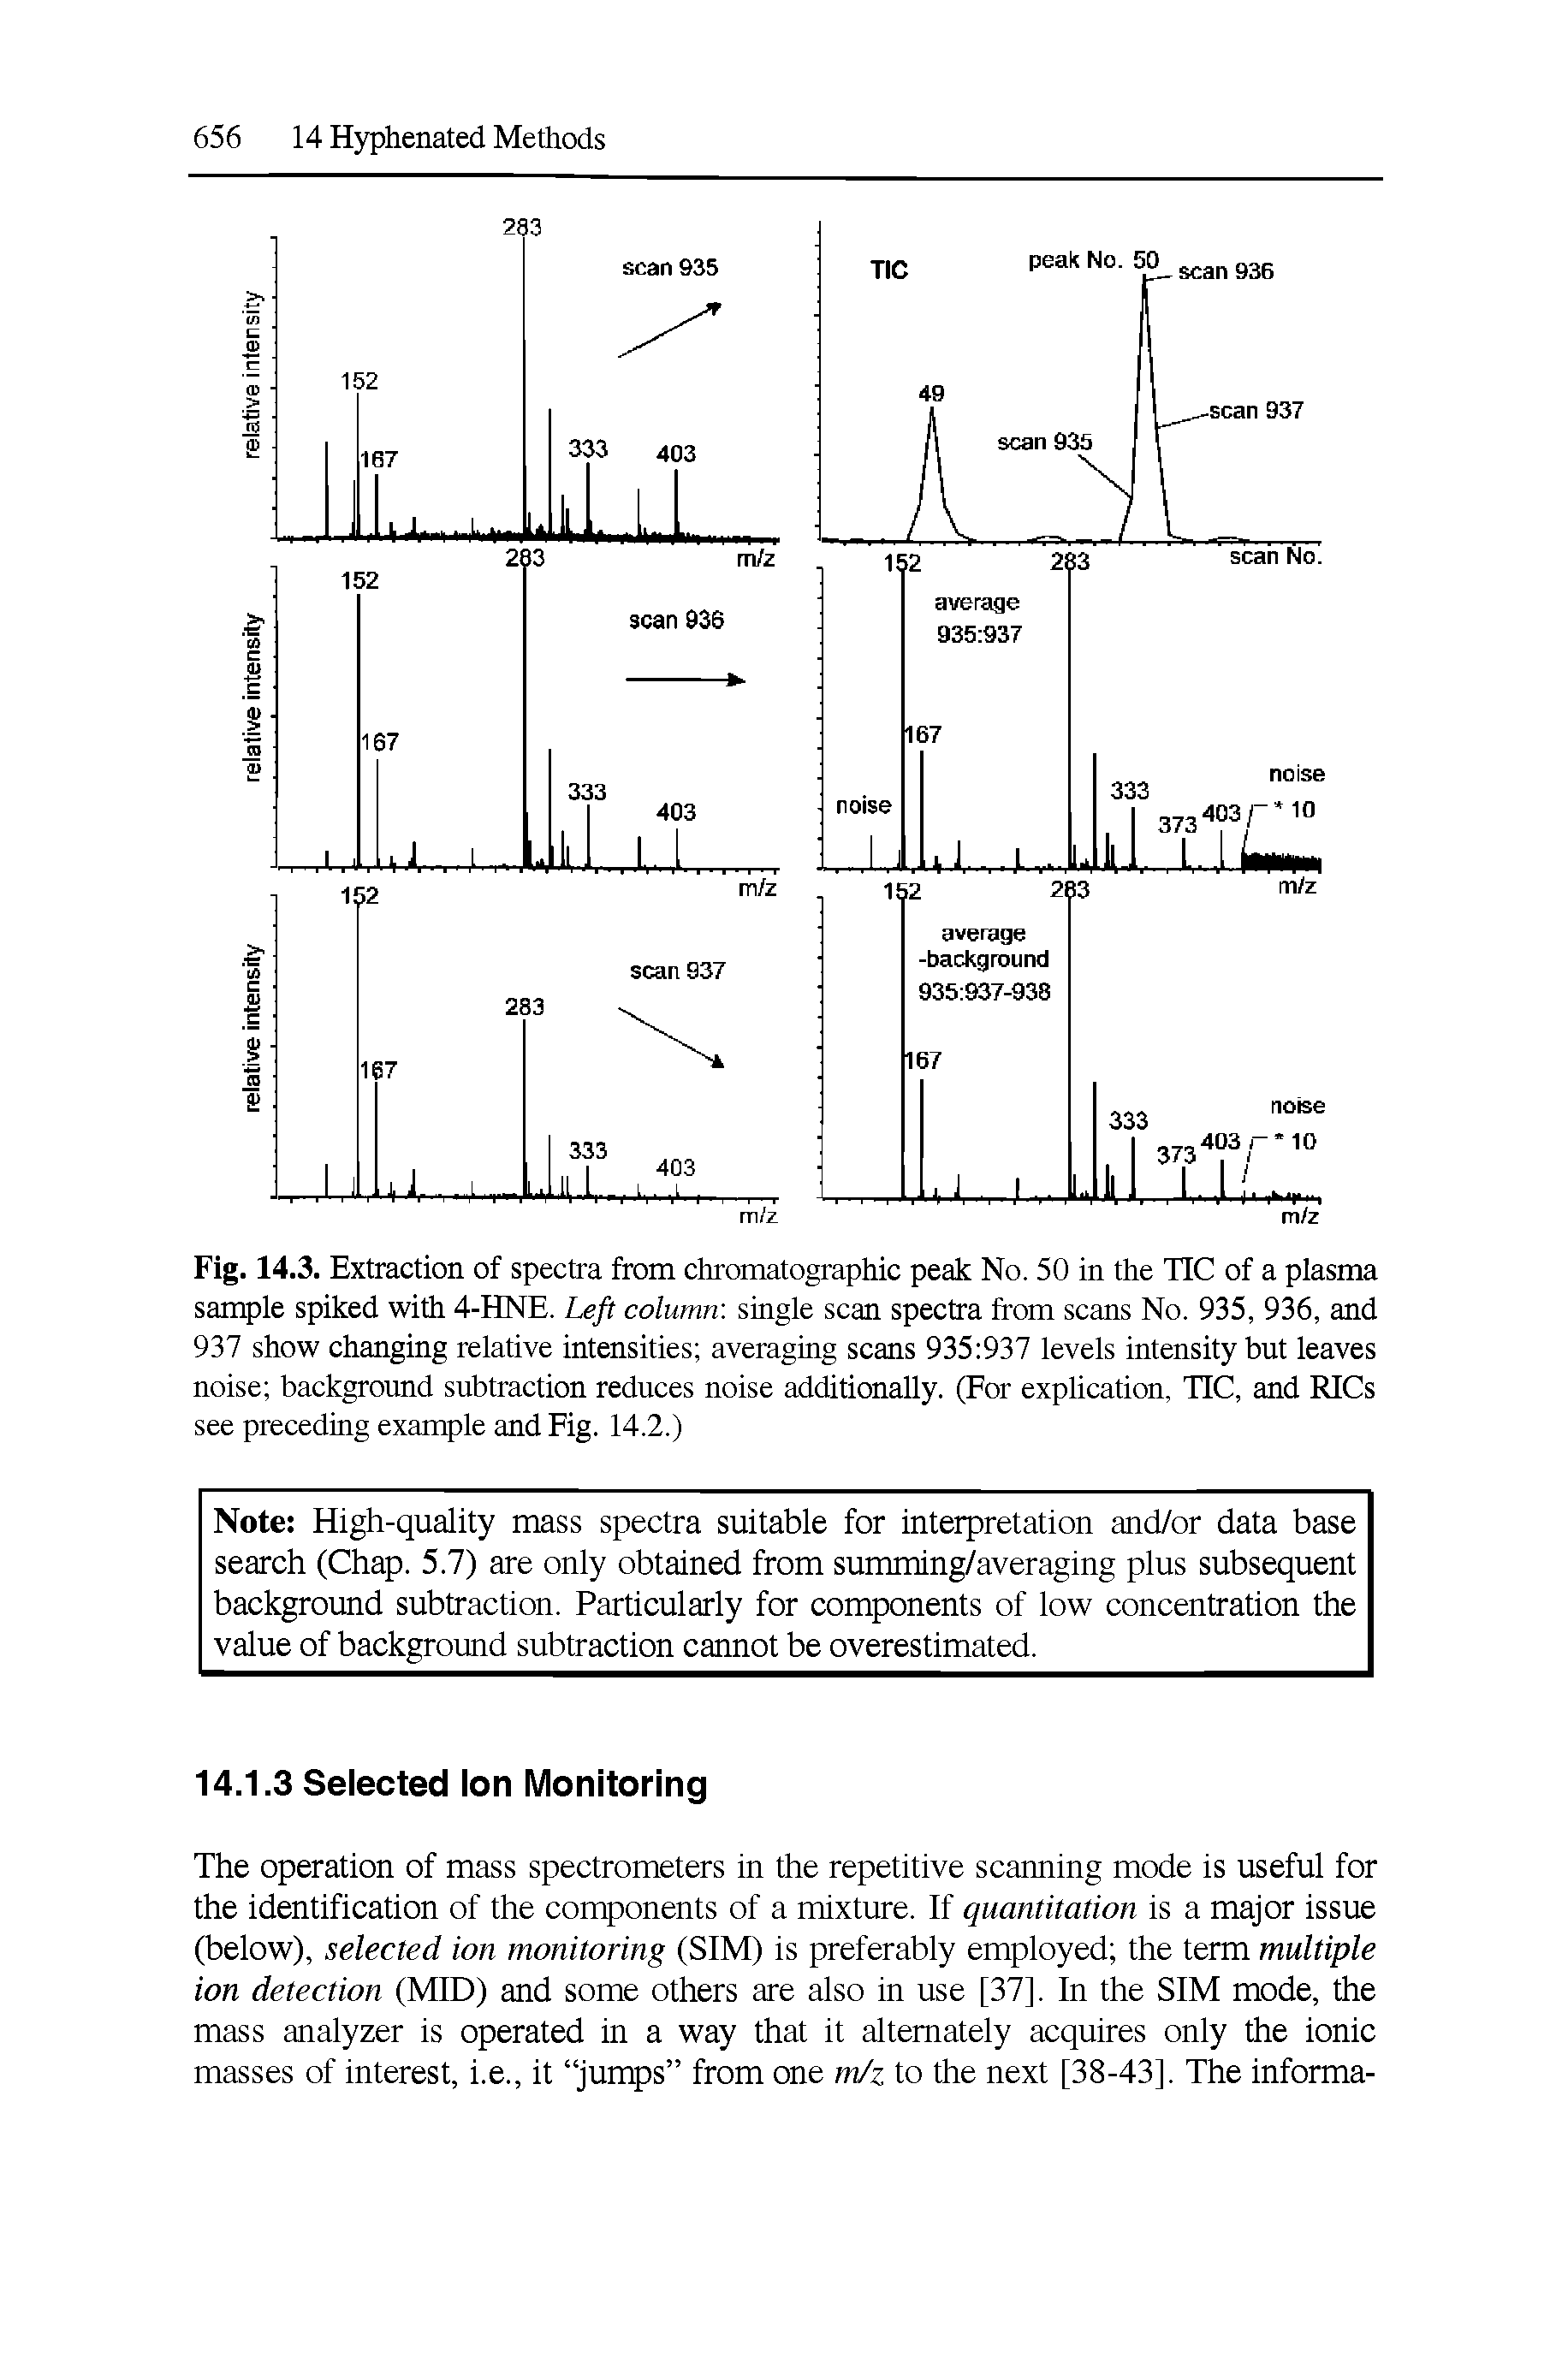 Fig. 14.3. Extraction of spectra from chromatographic peak No. 50 in the TIC of a plasma sample spiked with 4-HNE. Left column single scan spectra from scans No. 935, 936, and 937 show changing relative intensities averaging scans 935 937 levels intensity but leaves noise background subtraction reduces noise additionally. (For explication, HC, and RICs see preceding example and Fig. 14.2.)...